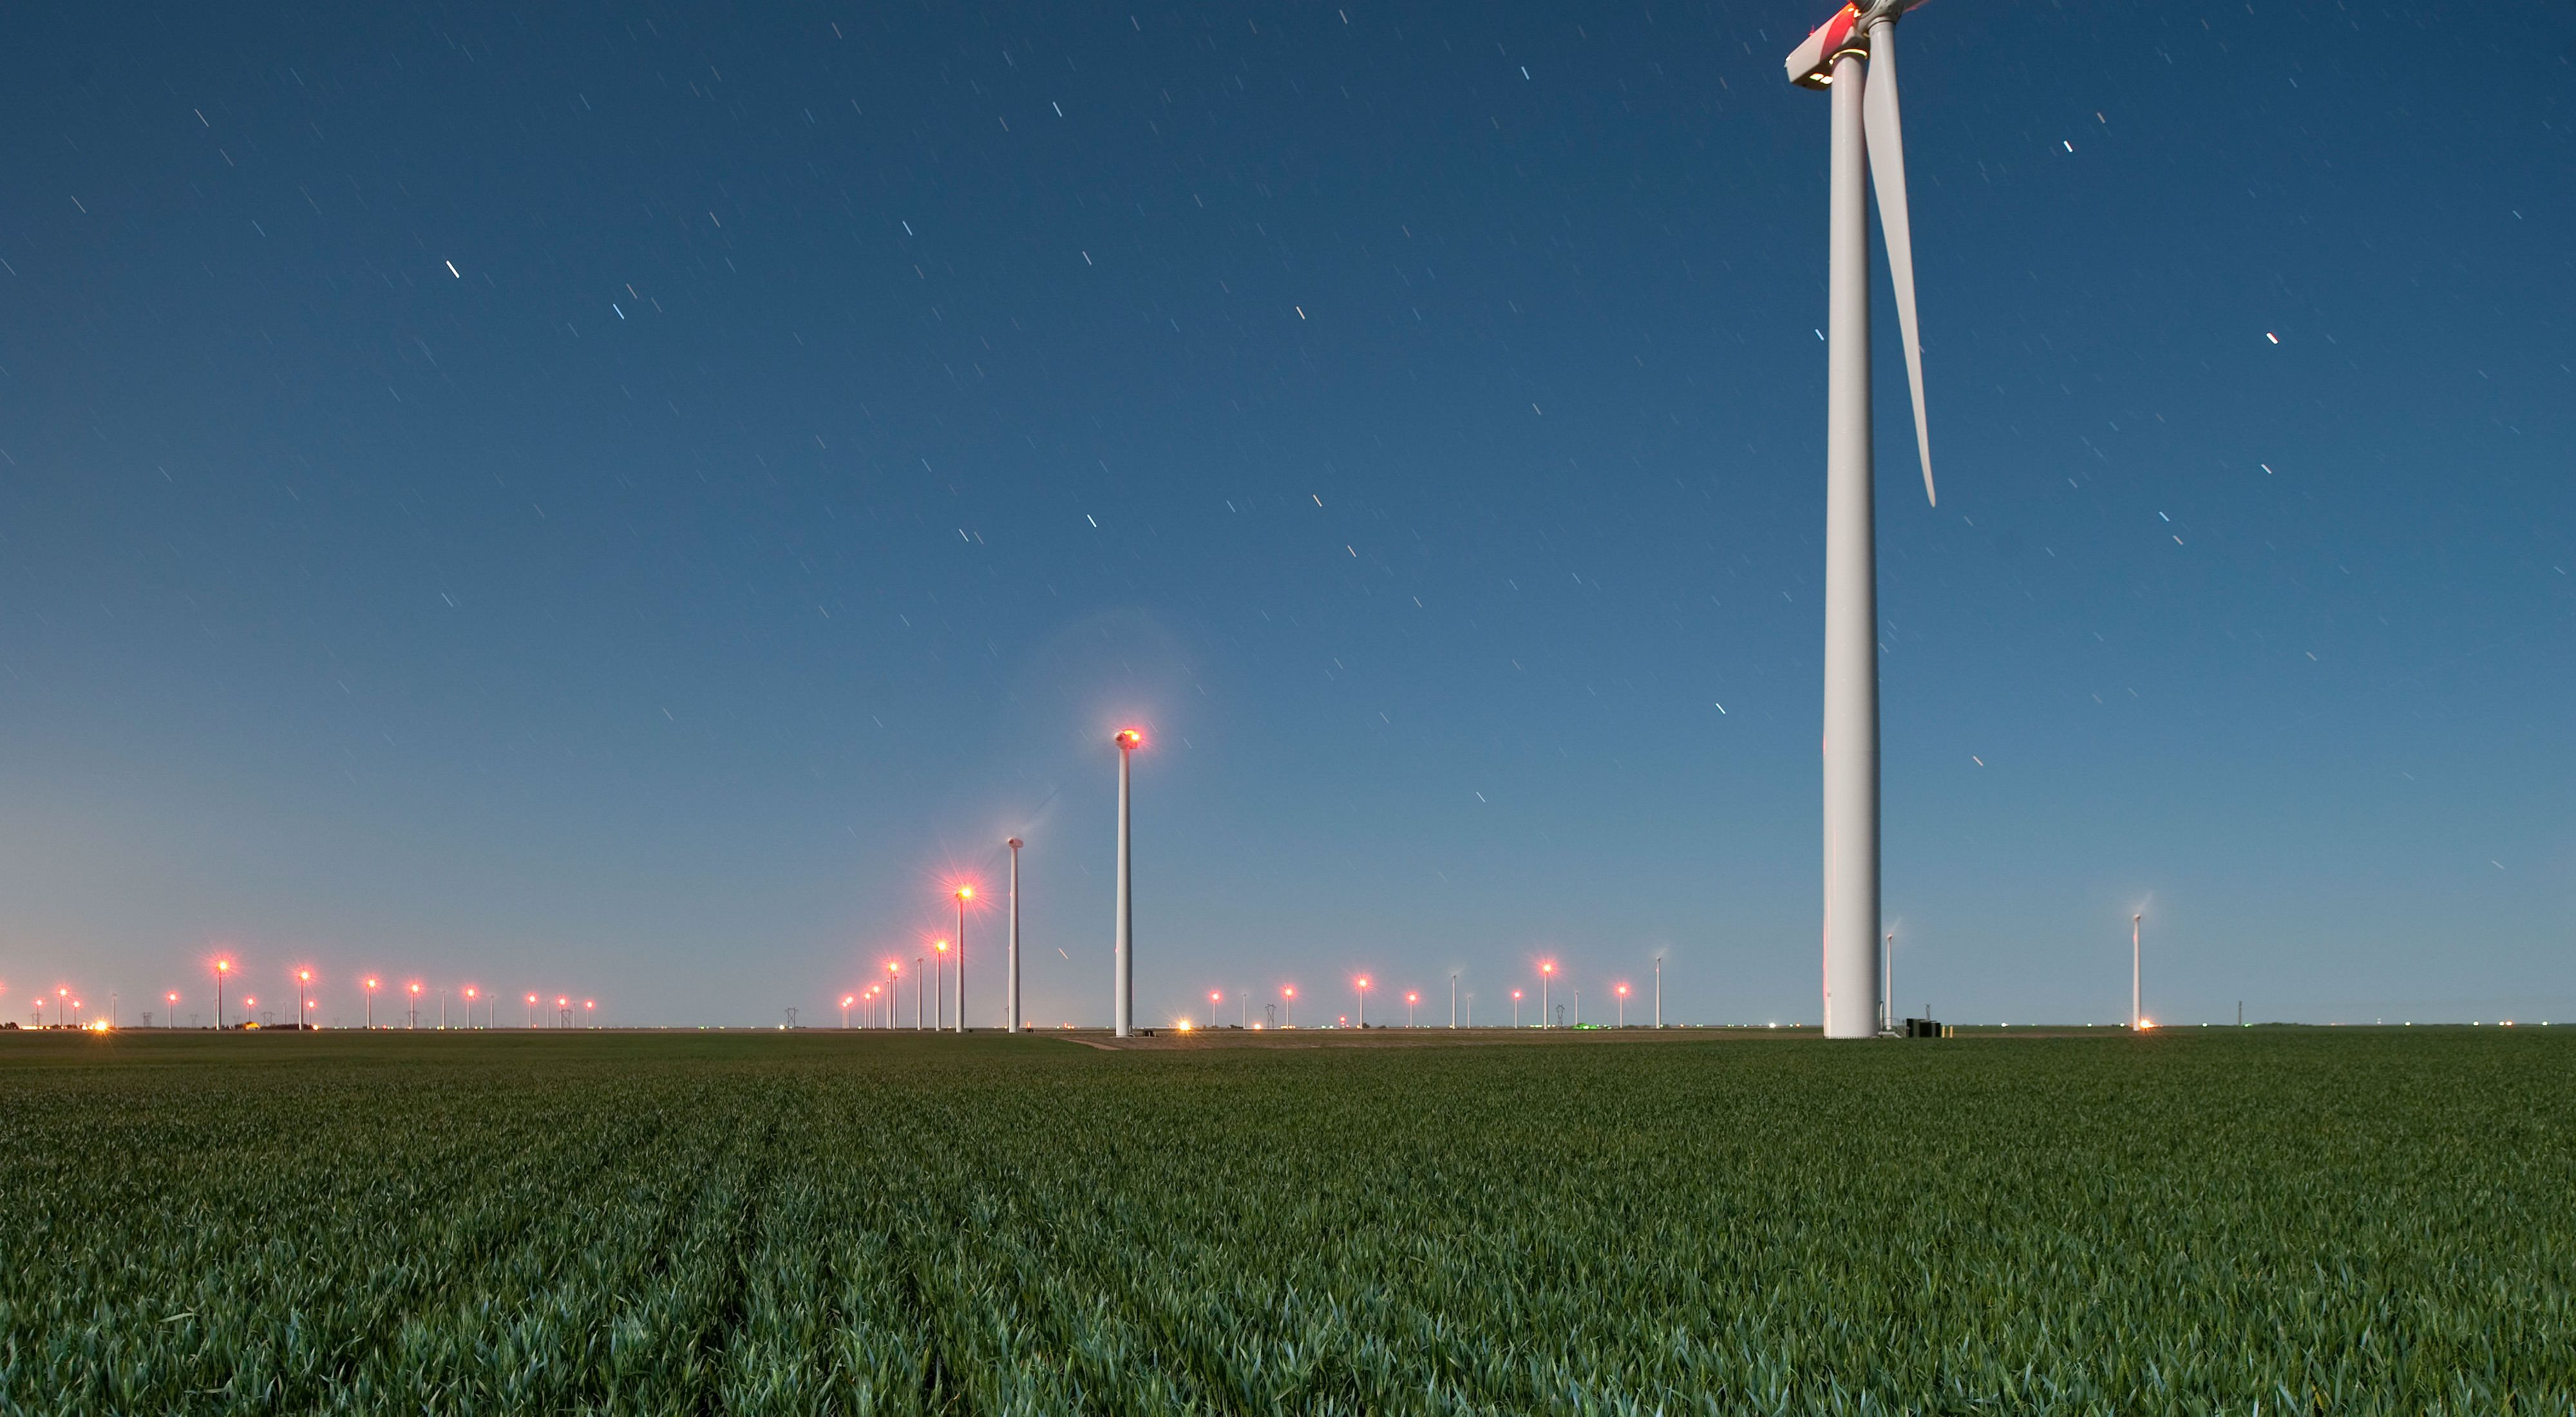 Night photograph of the Spearville Wind Farm just north of the town of Spearville, in Ford County, Kansas